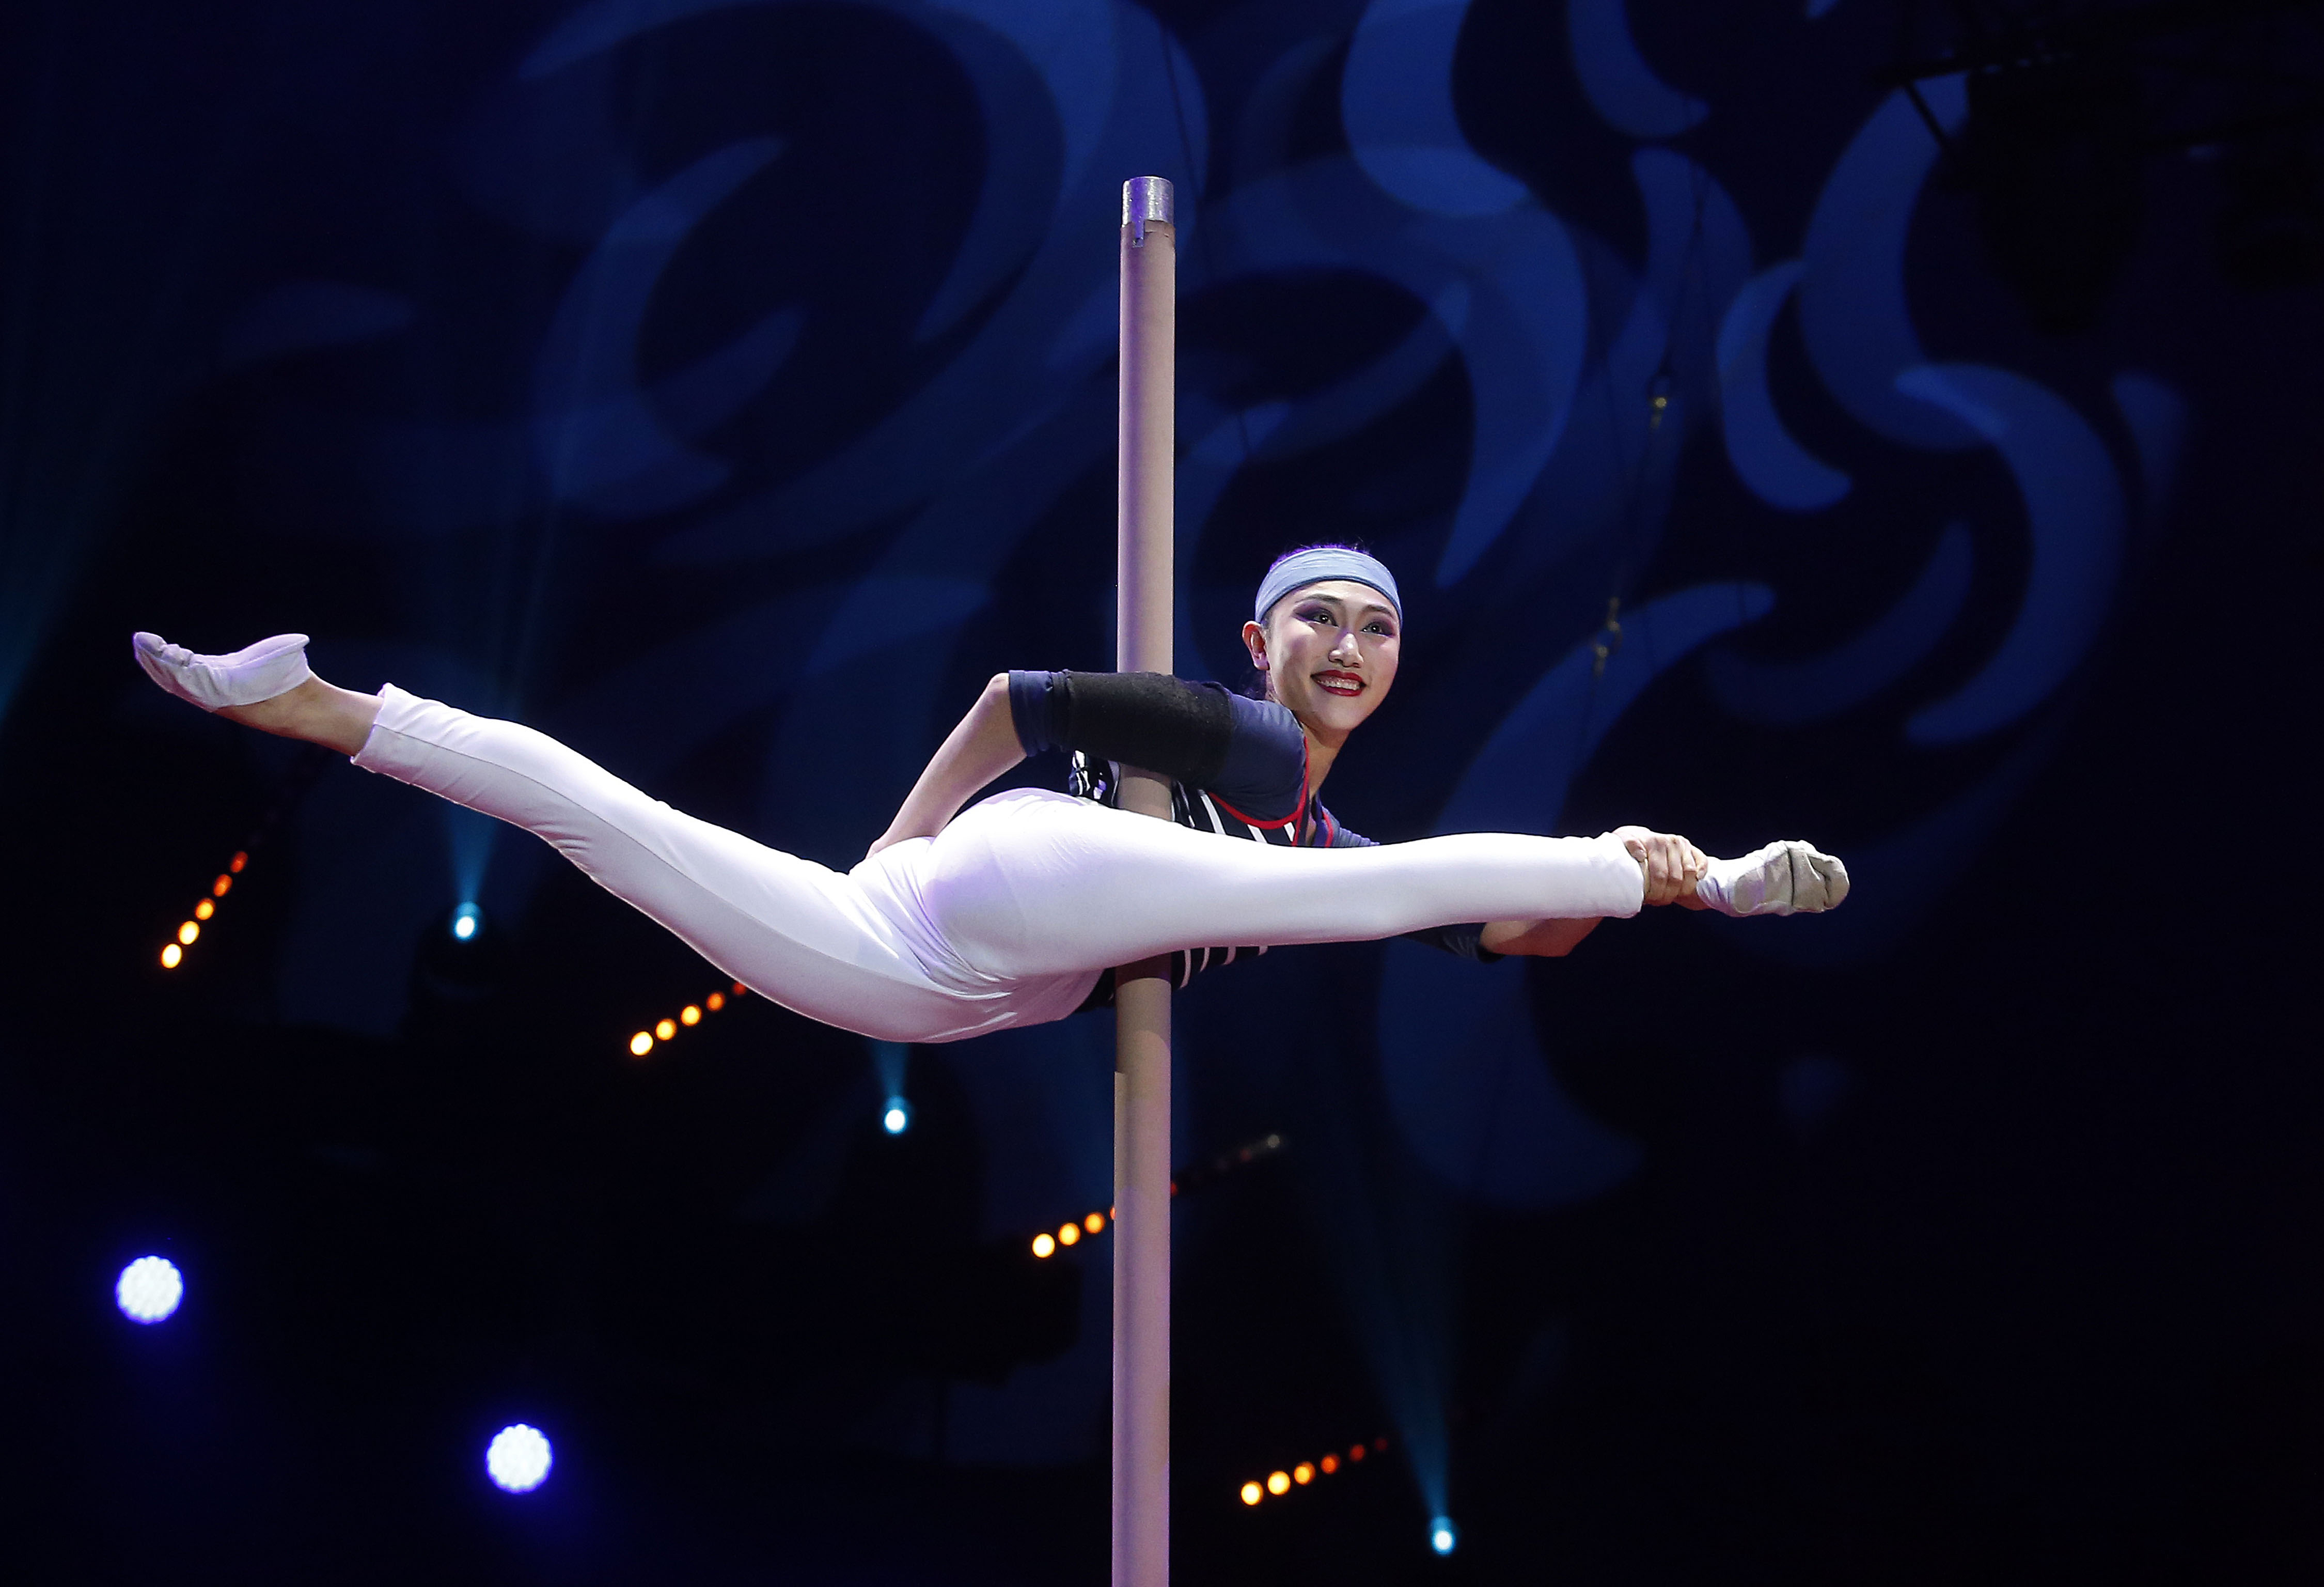 In this pool photo taken Thursday, Jan. 17, 2019, a member of the China National Acrobatic Troupe performs during the opening ceremony of the 43rd Monte-Carlo International Circus Festival in Monaco. The festival will run from Jan. 17 to 27. (Sebastien Nogier/Pool Photo via AP)